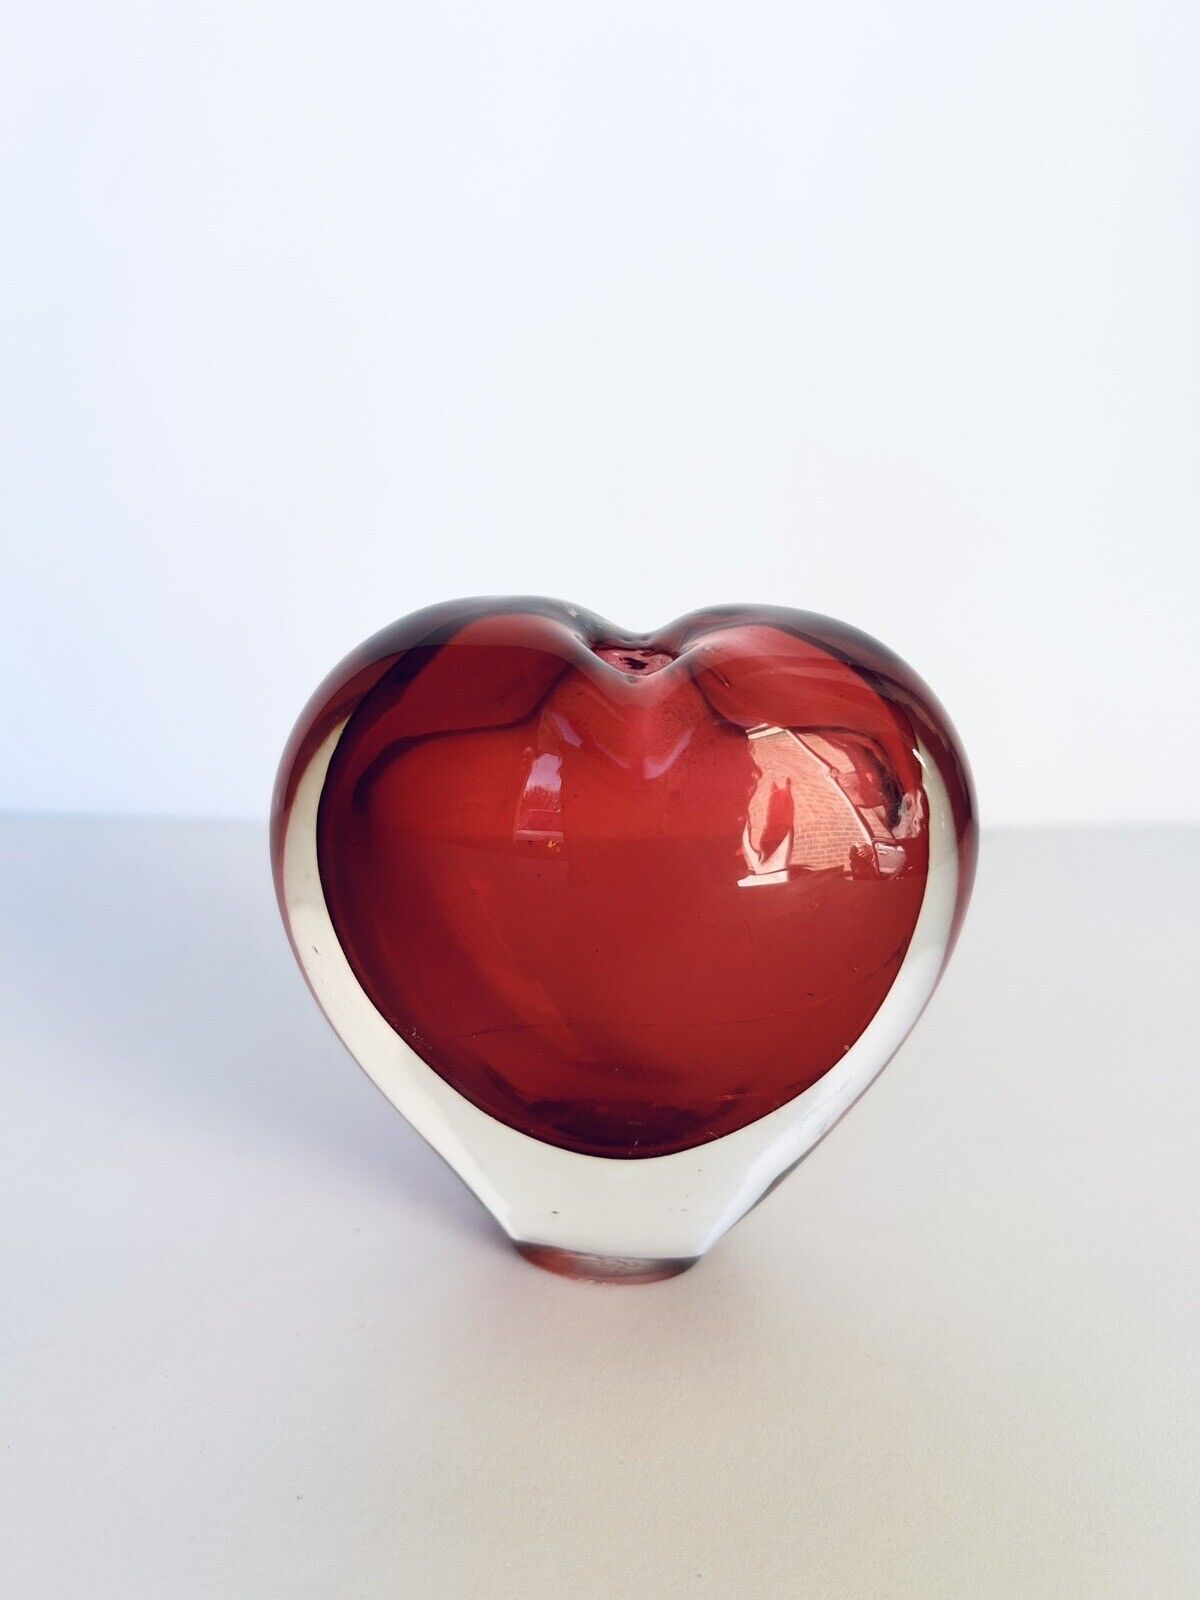 Vintage 1990's dynasty gallery heirloom collectibles Red Heart Shaped Small Vase